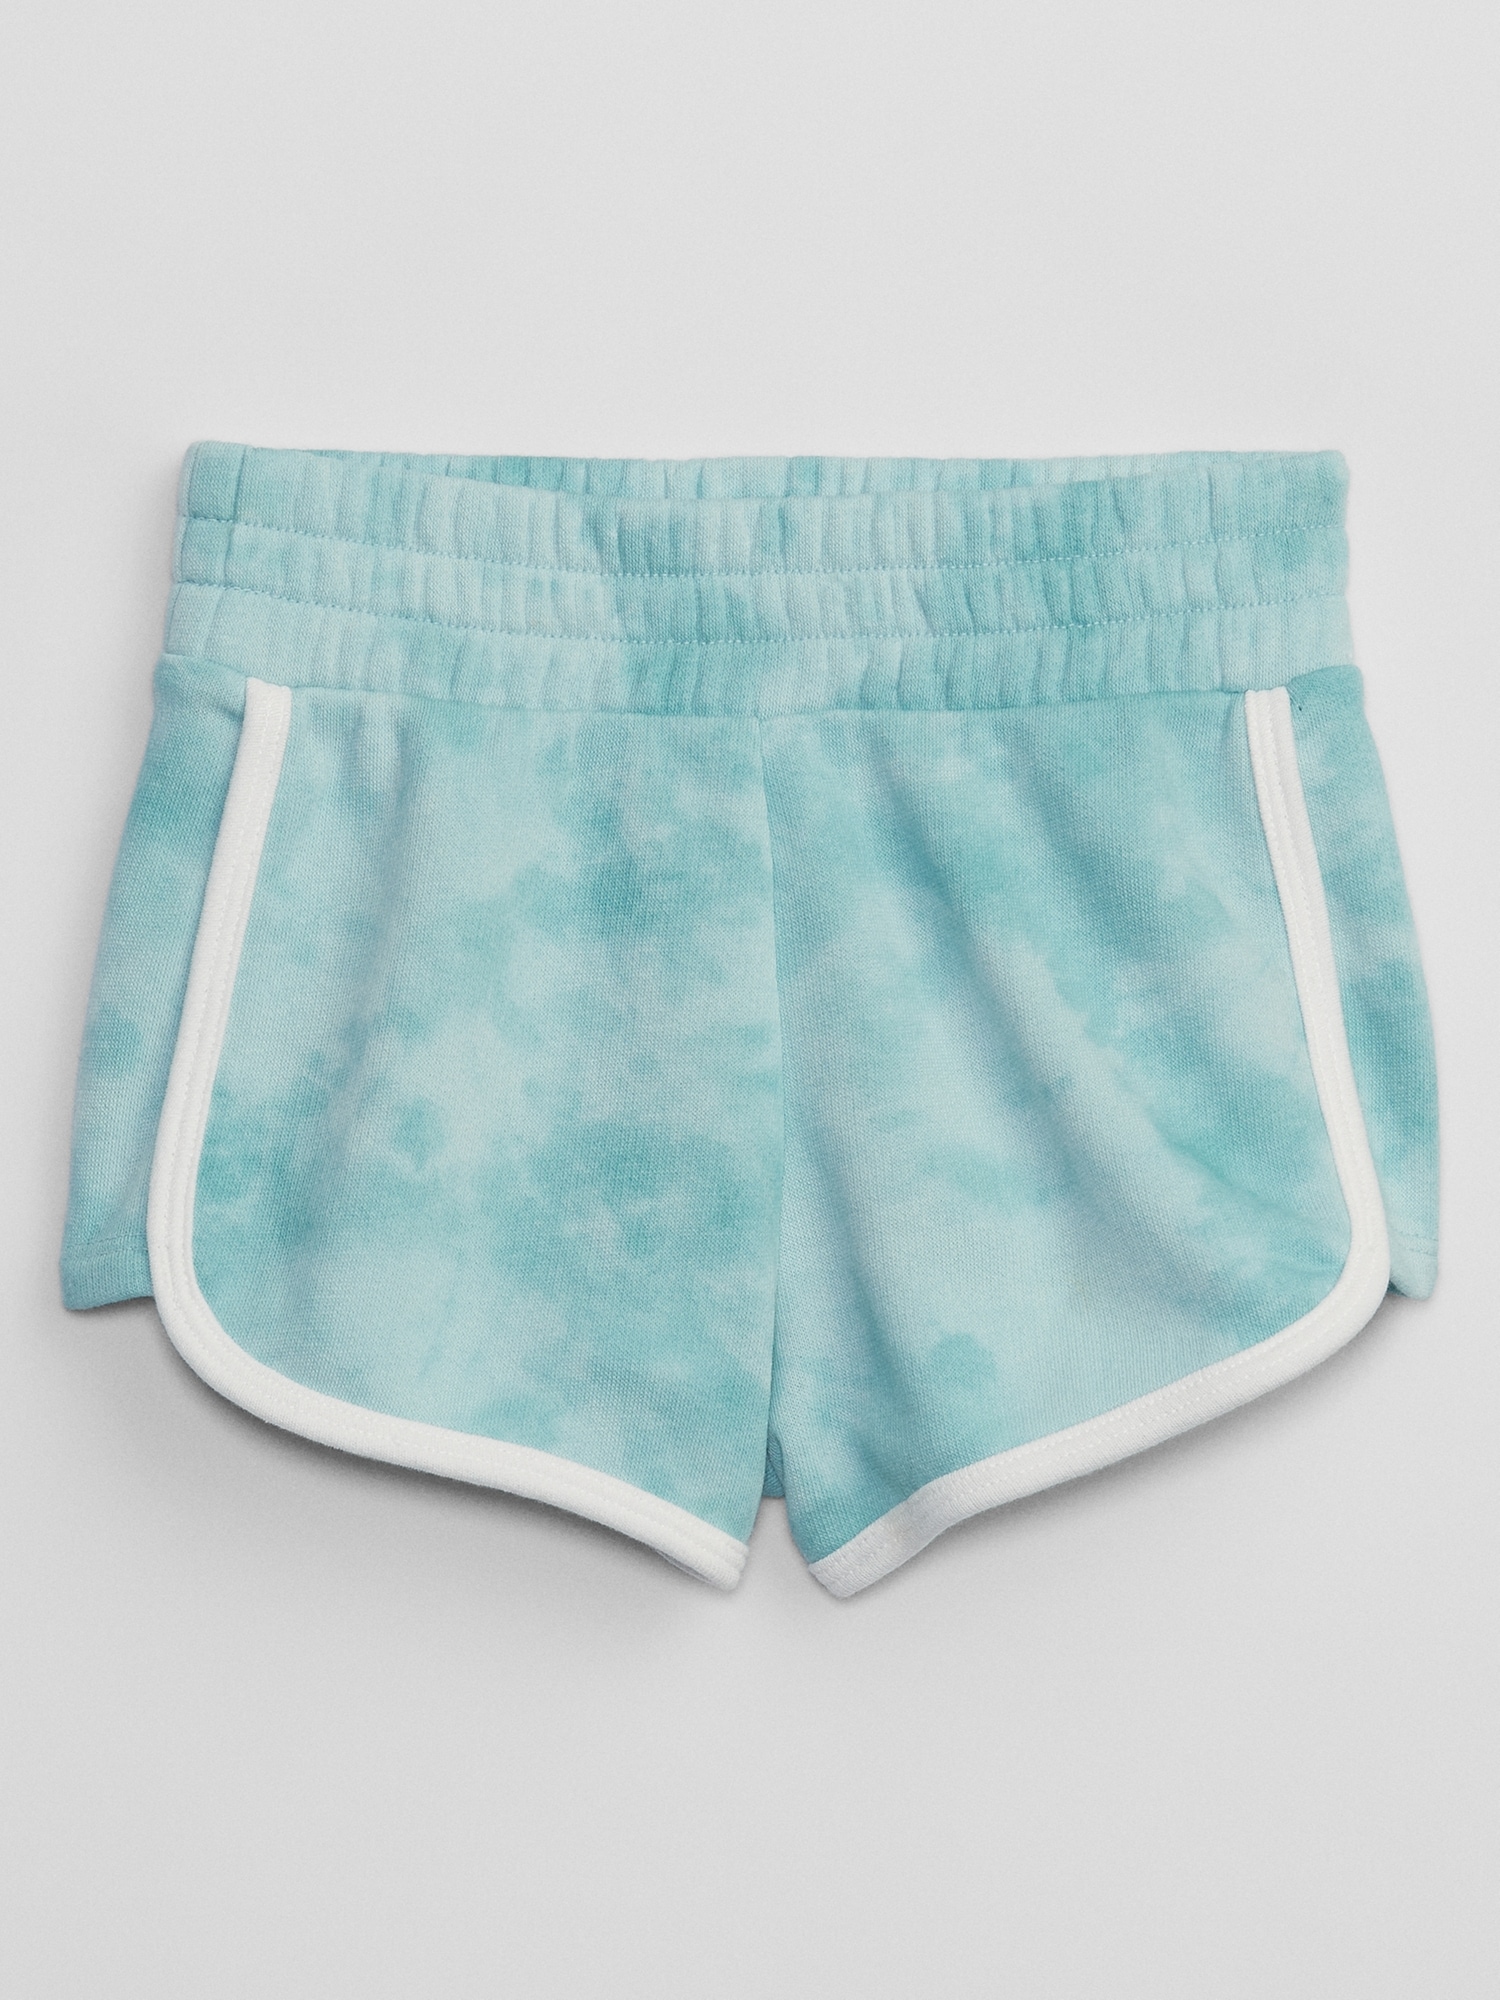 Toddler Tie-Dye Pull-On Shorts